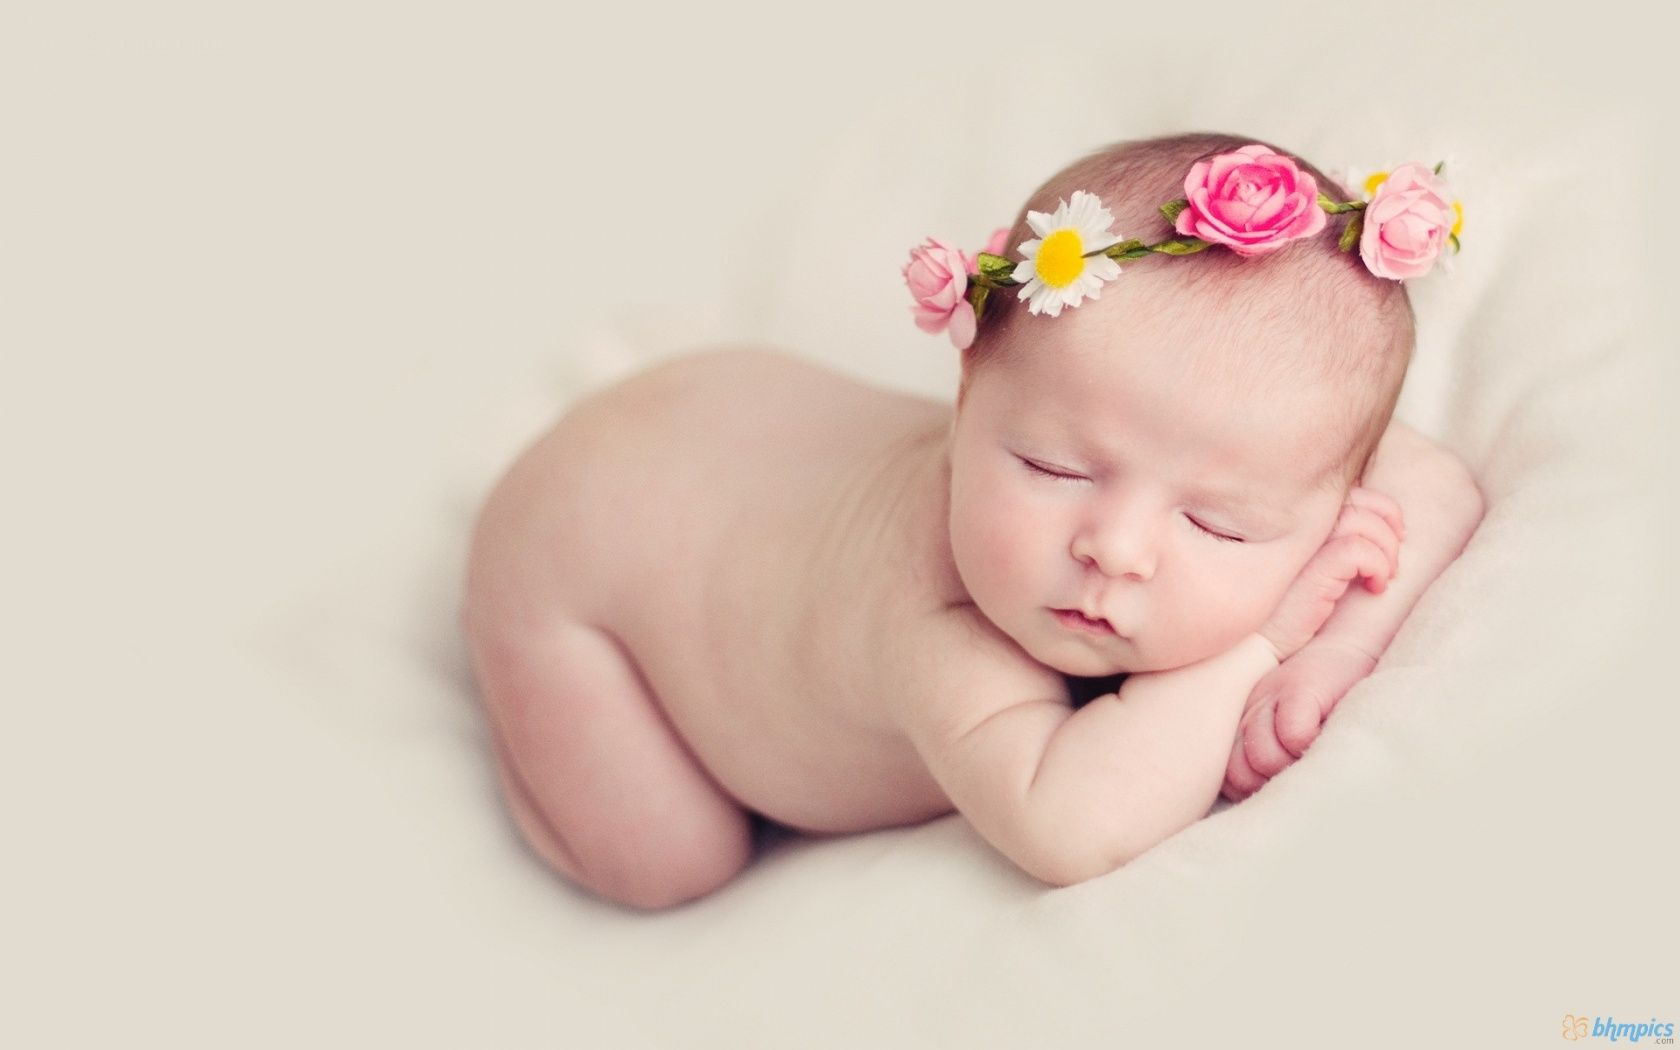 Download Cute Baby Photos Wallpaper For Download And Share. Baby